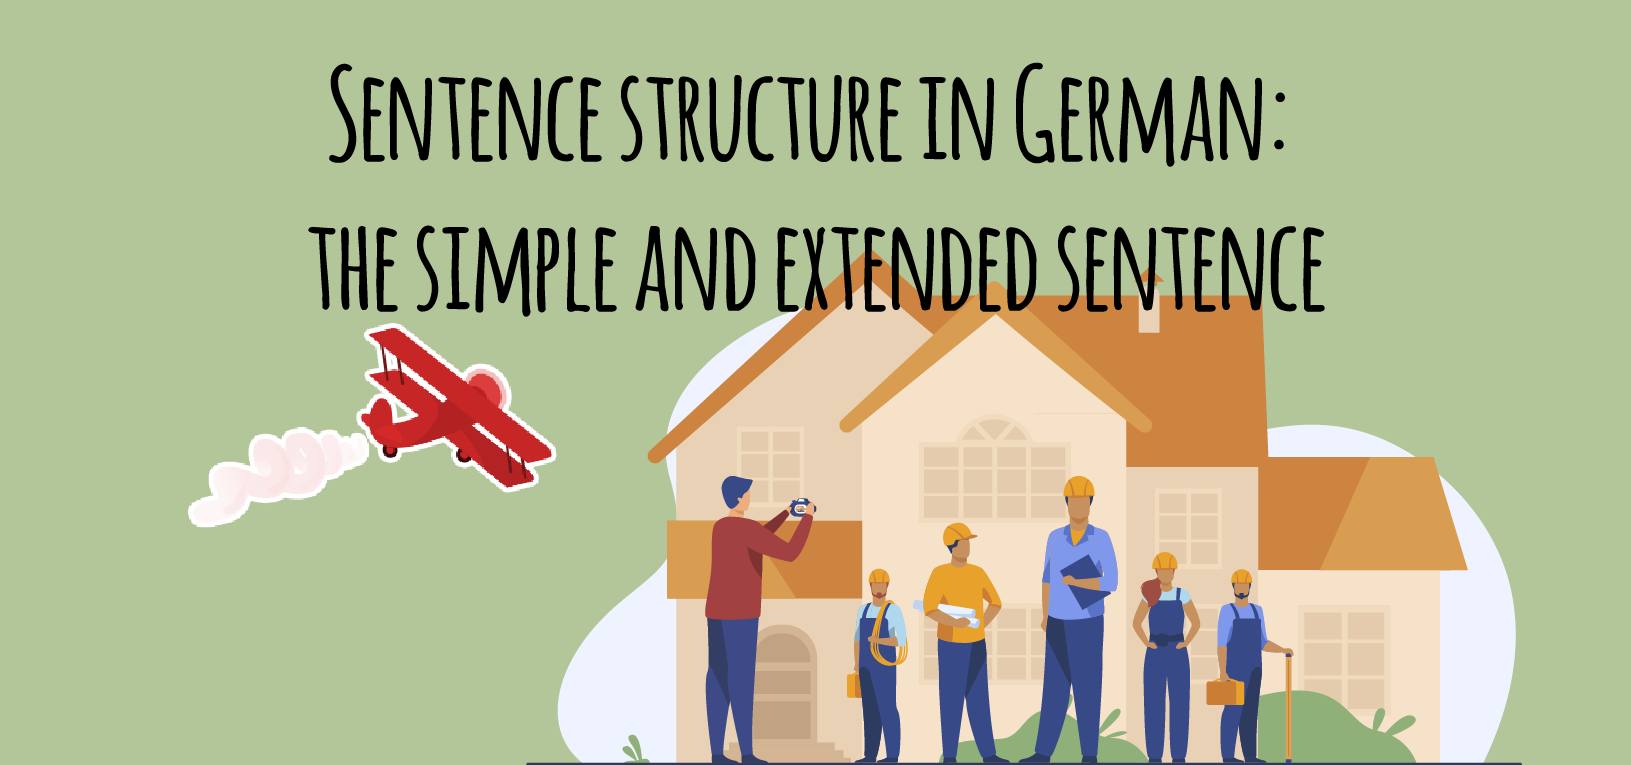 sentence-structure-in-german-the-simple-and-extended-sentence